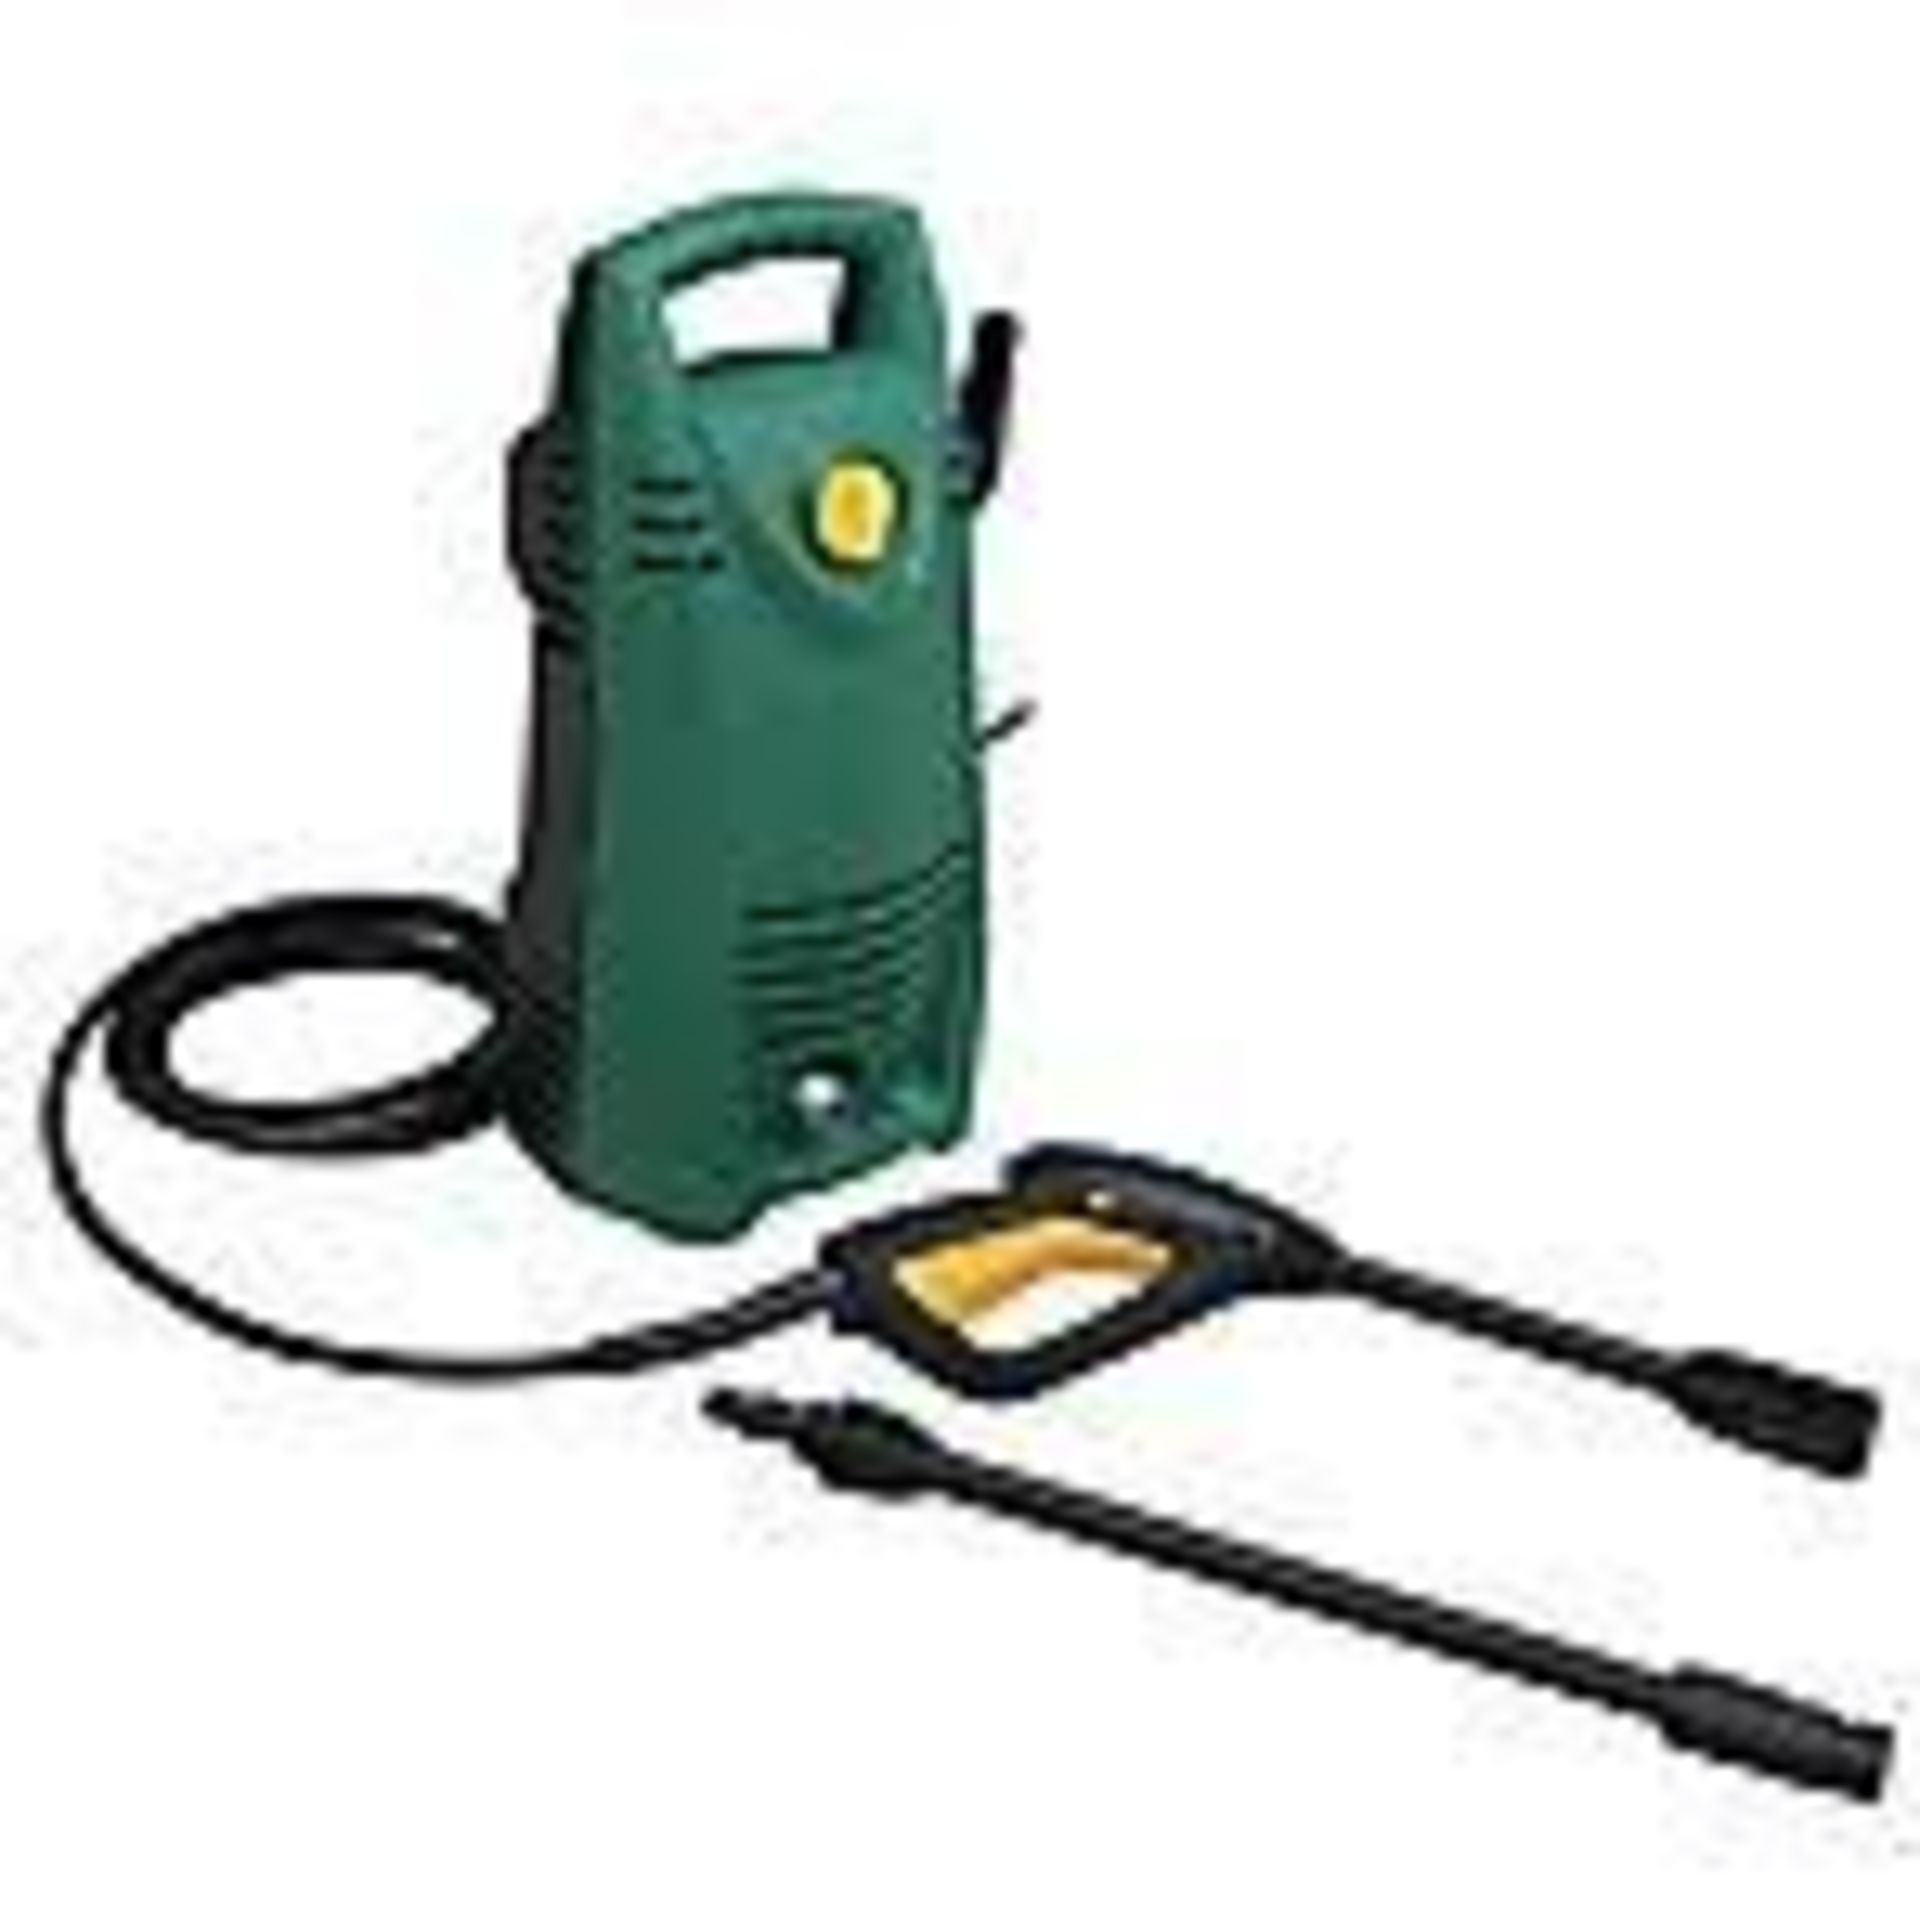 Auto-stop Corded Pressure washer 1.4kW FPHPC100. -R14.7. A great light weight pressure washer